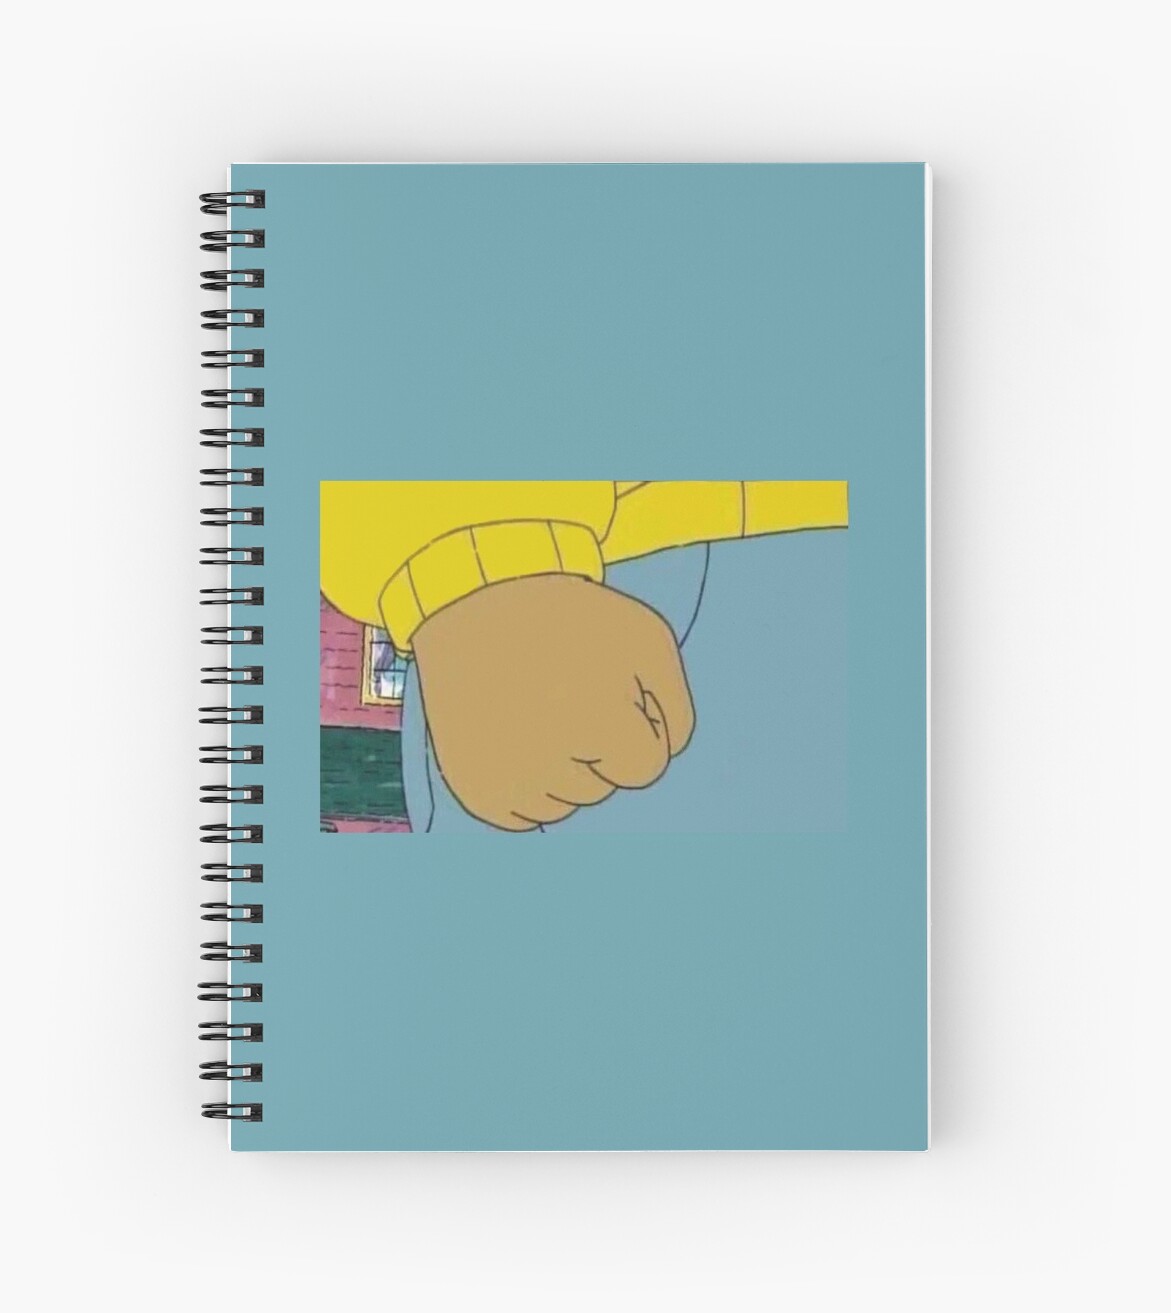 Arthurs Clenched Fist Meme Spiral Notebooks By Bananaha Redbubble